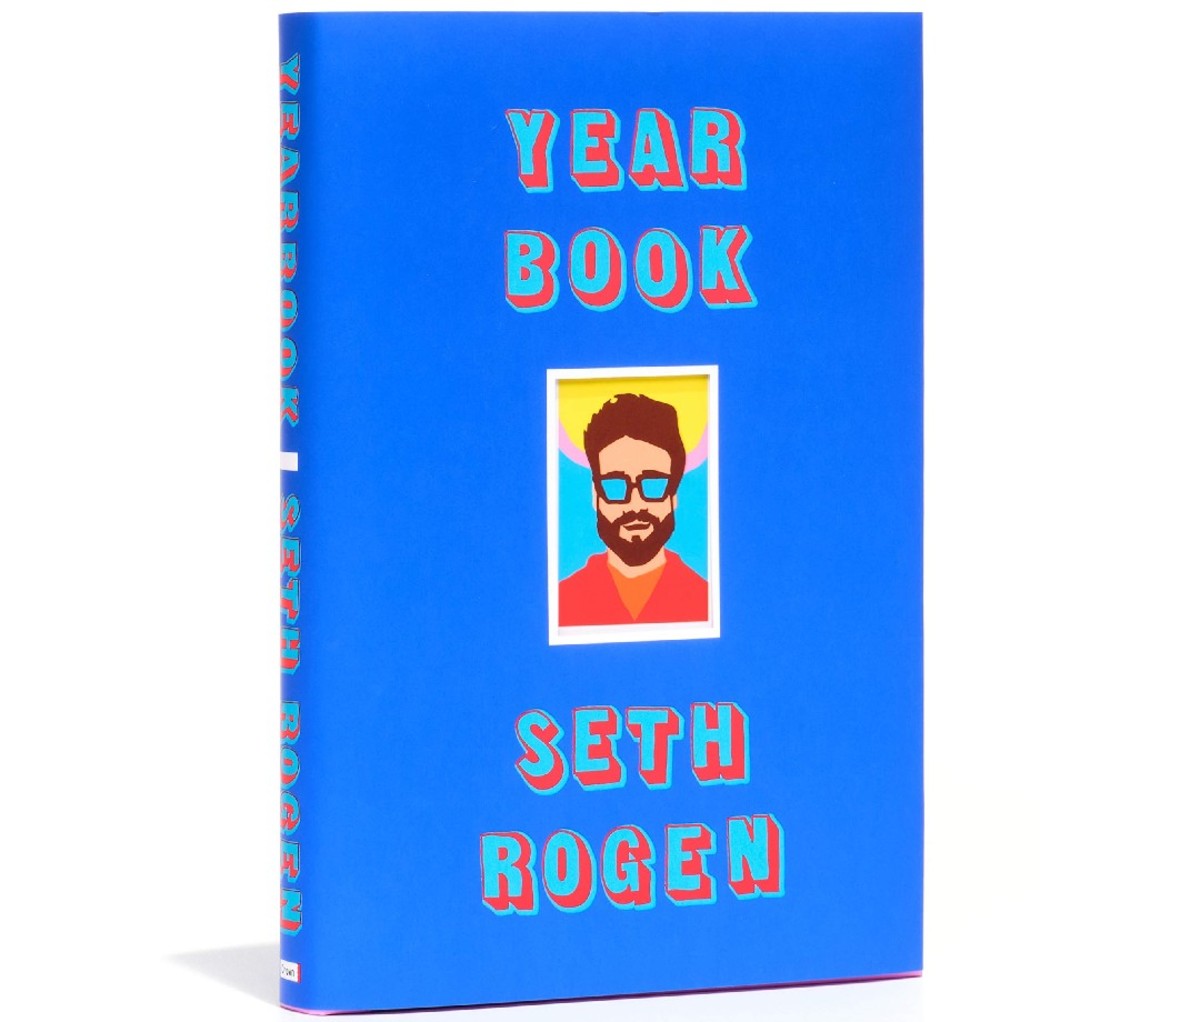 Yearbook by Seth Rogen